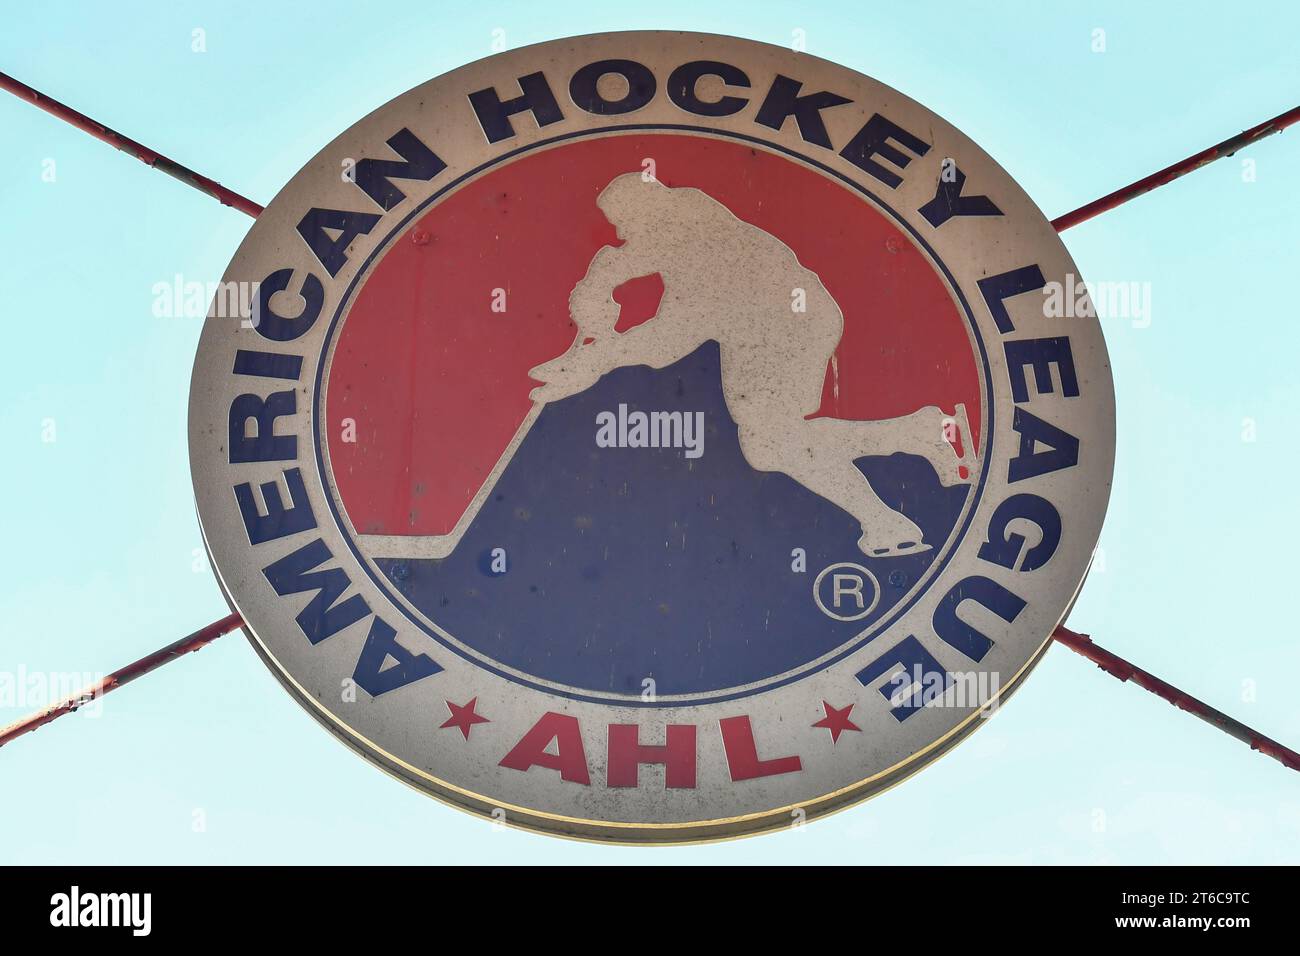 The AHL sign hangs outside of the Wilkes-Barre Scranton Penguins training center. After the death of Ice Hockey player Adam Johnson players in the AHL wear neck guards for protection. Wilkes-Barre Penguins players practiced Wednesday wearing them. Stock Photo